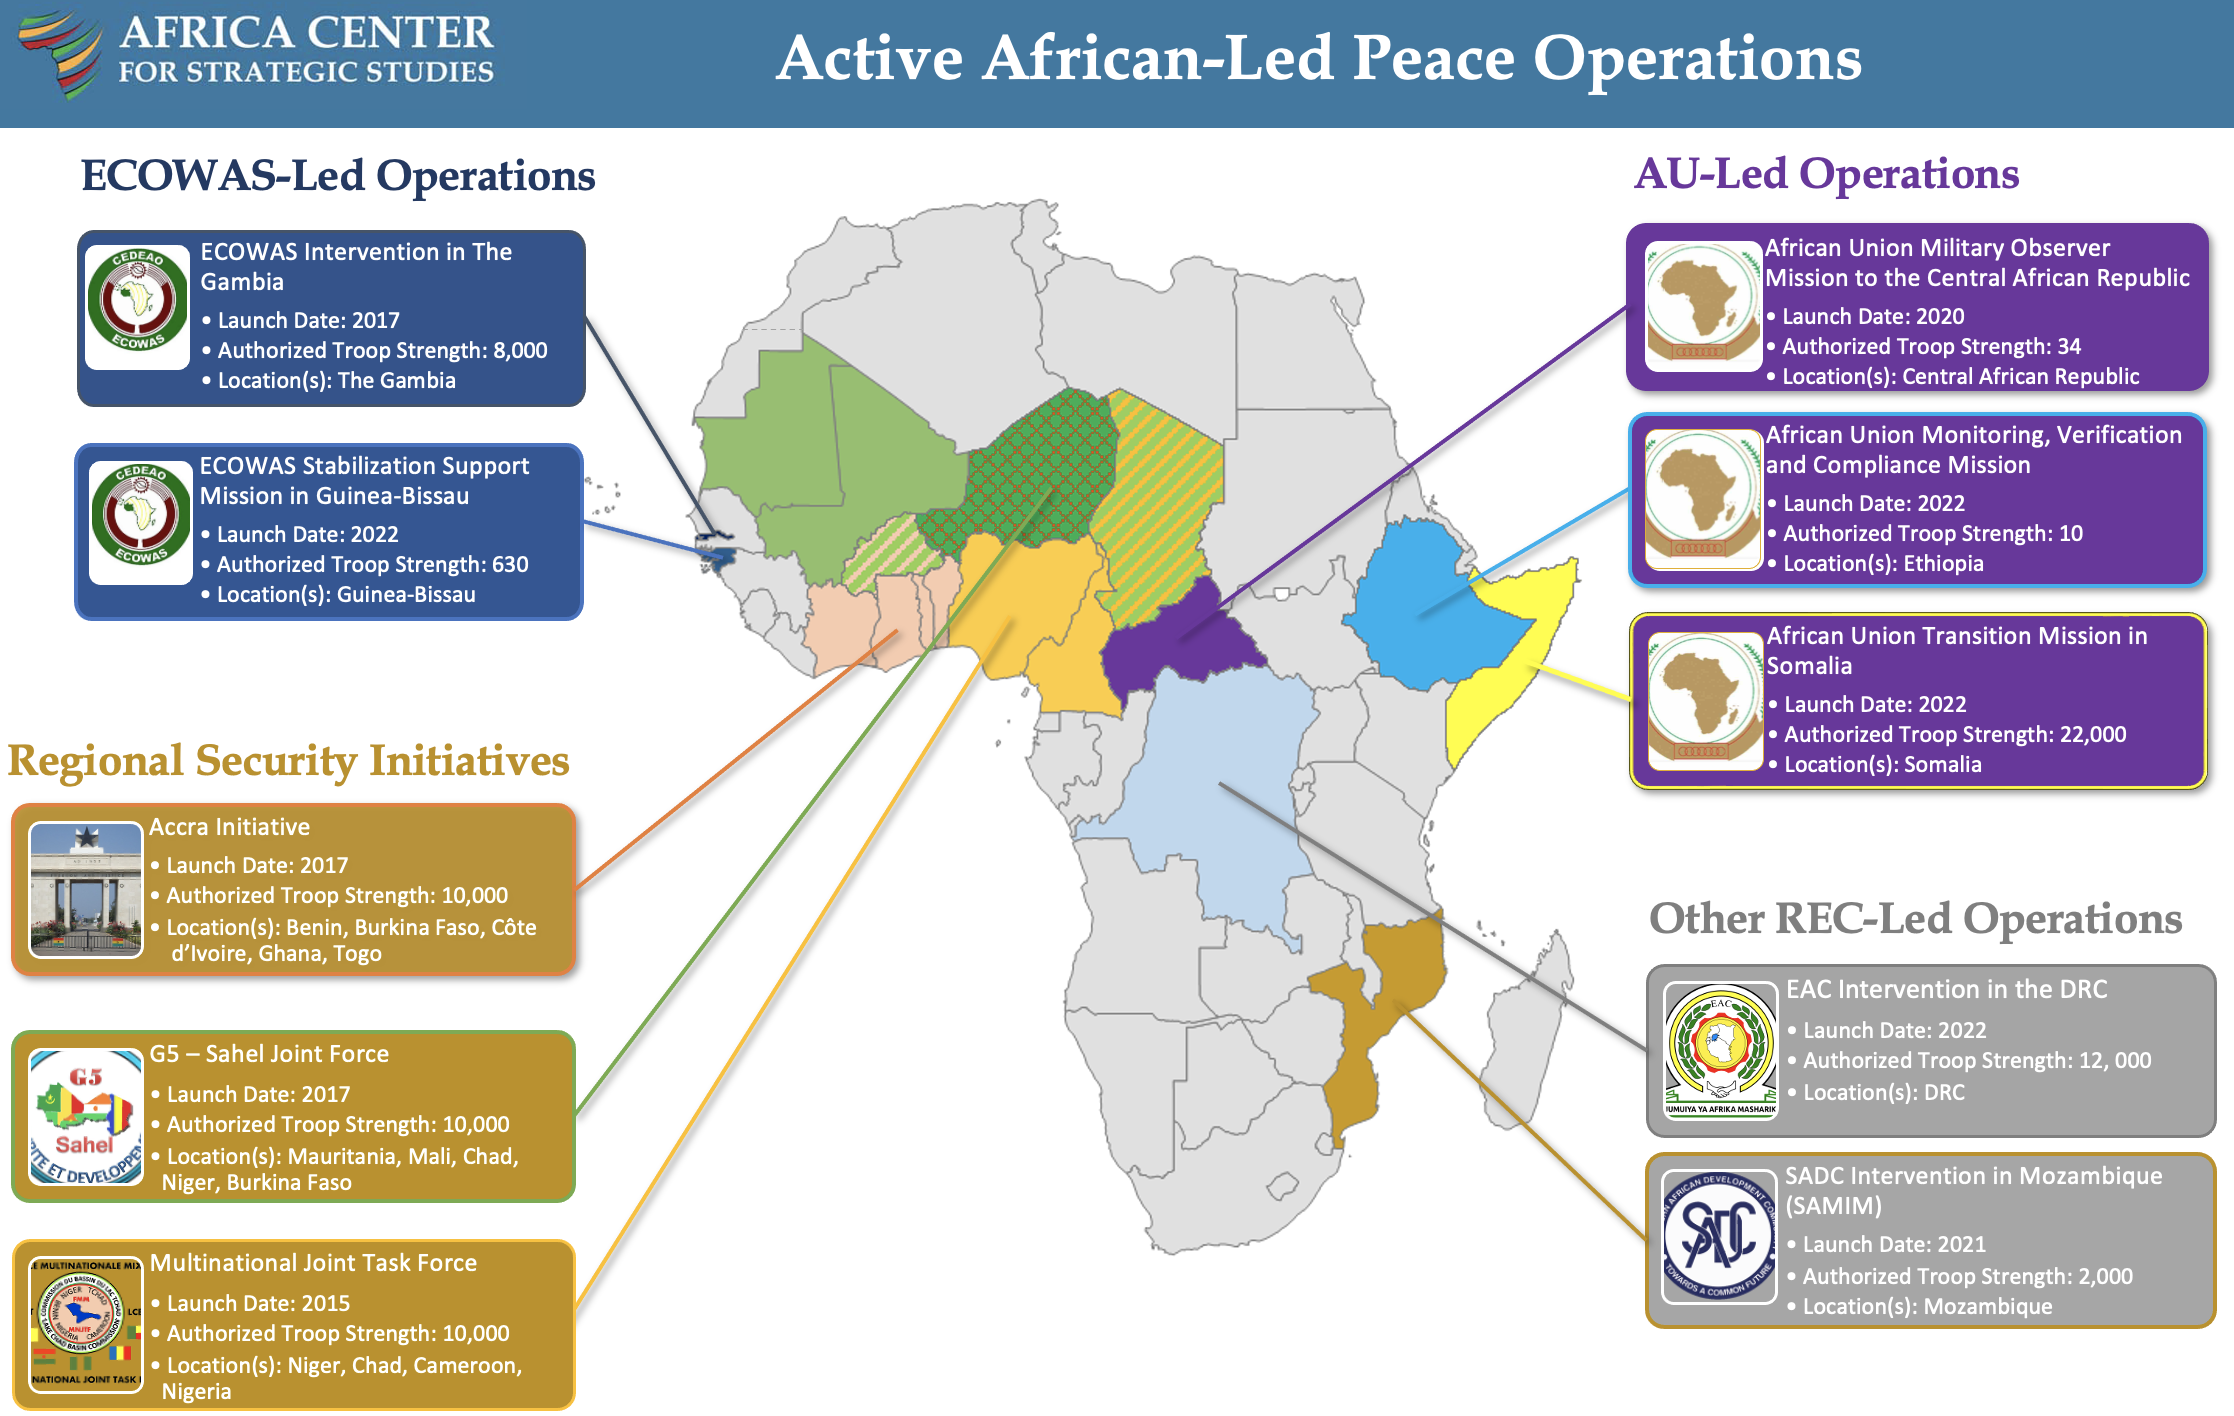 Three Ways to Improve Multilateral Peacekeeping in Africa (and Beyond)